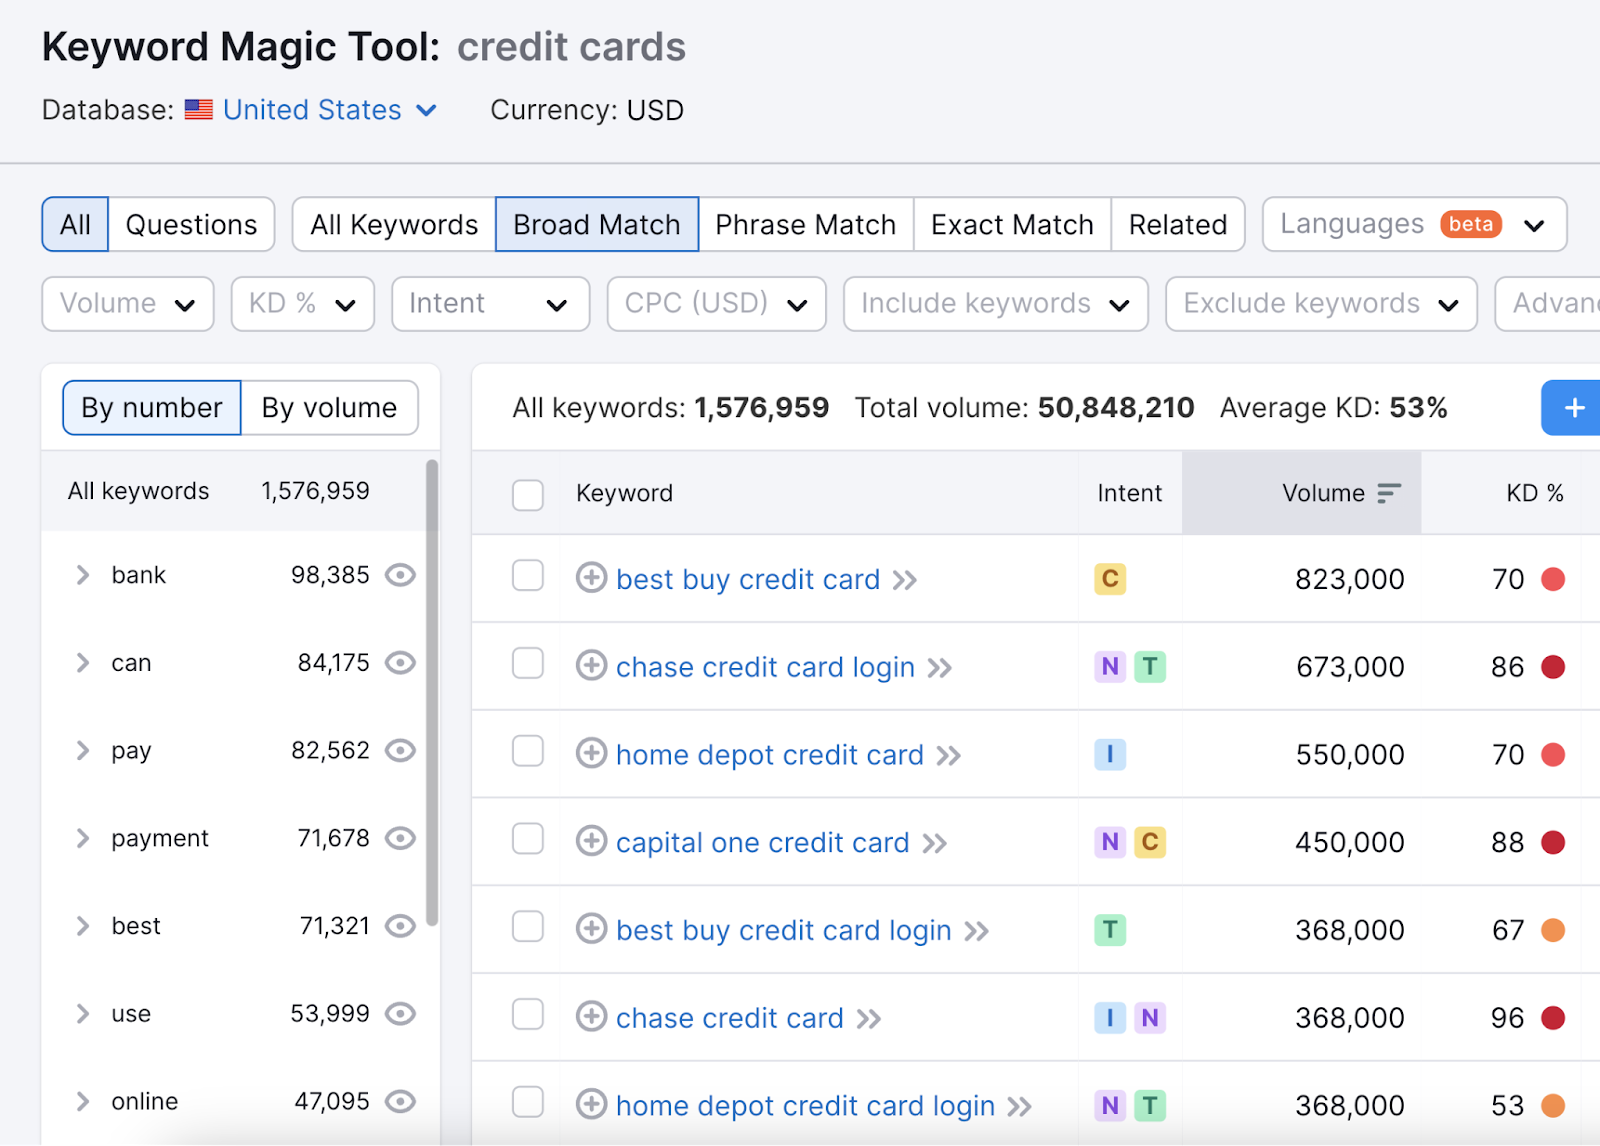 A list of keywords related to "credit cards" in Keyword Magic Tool